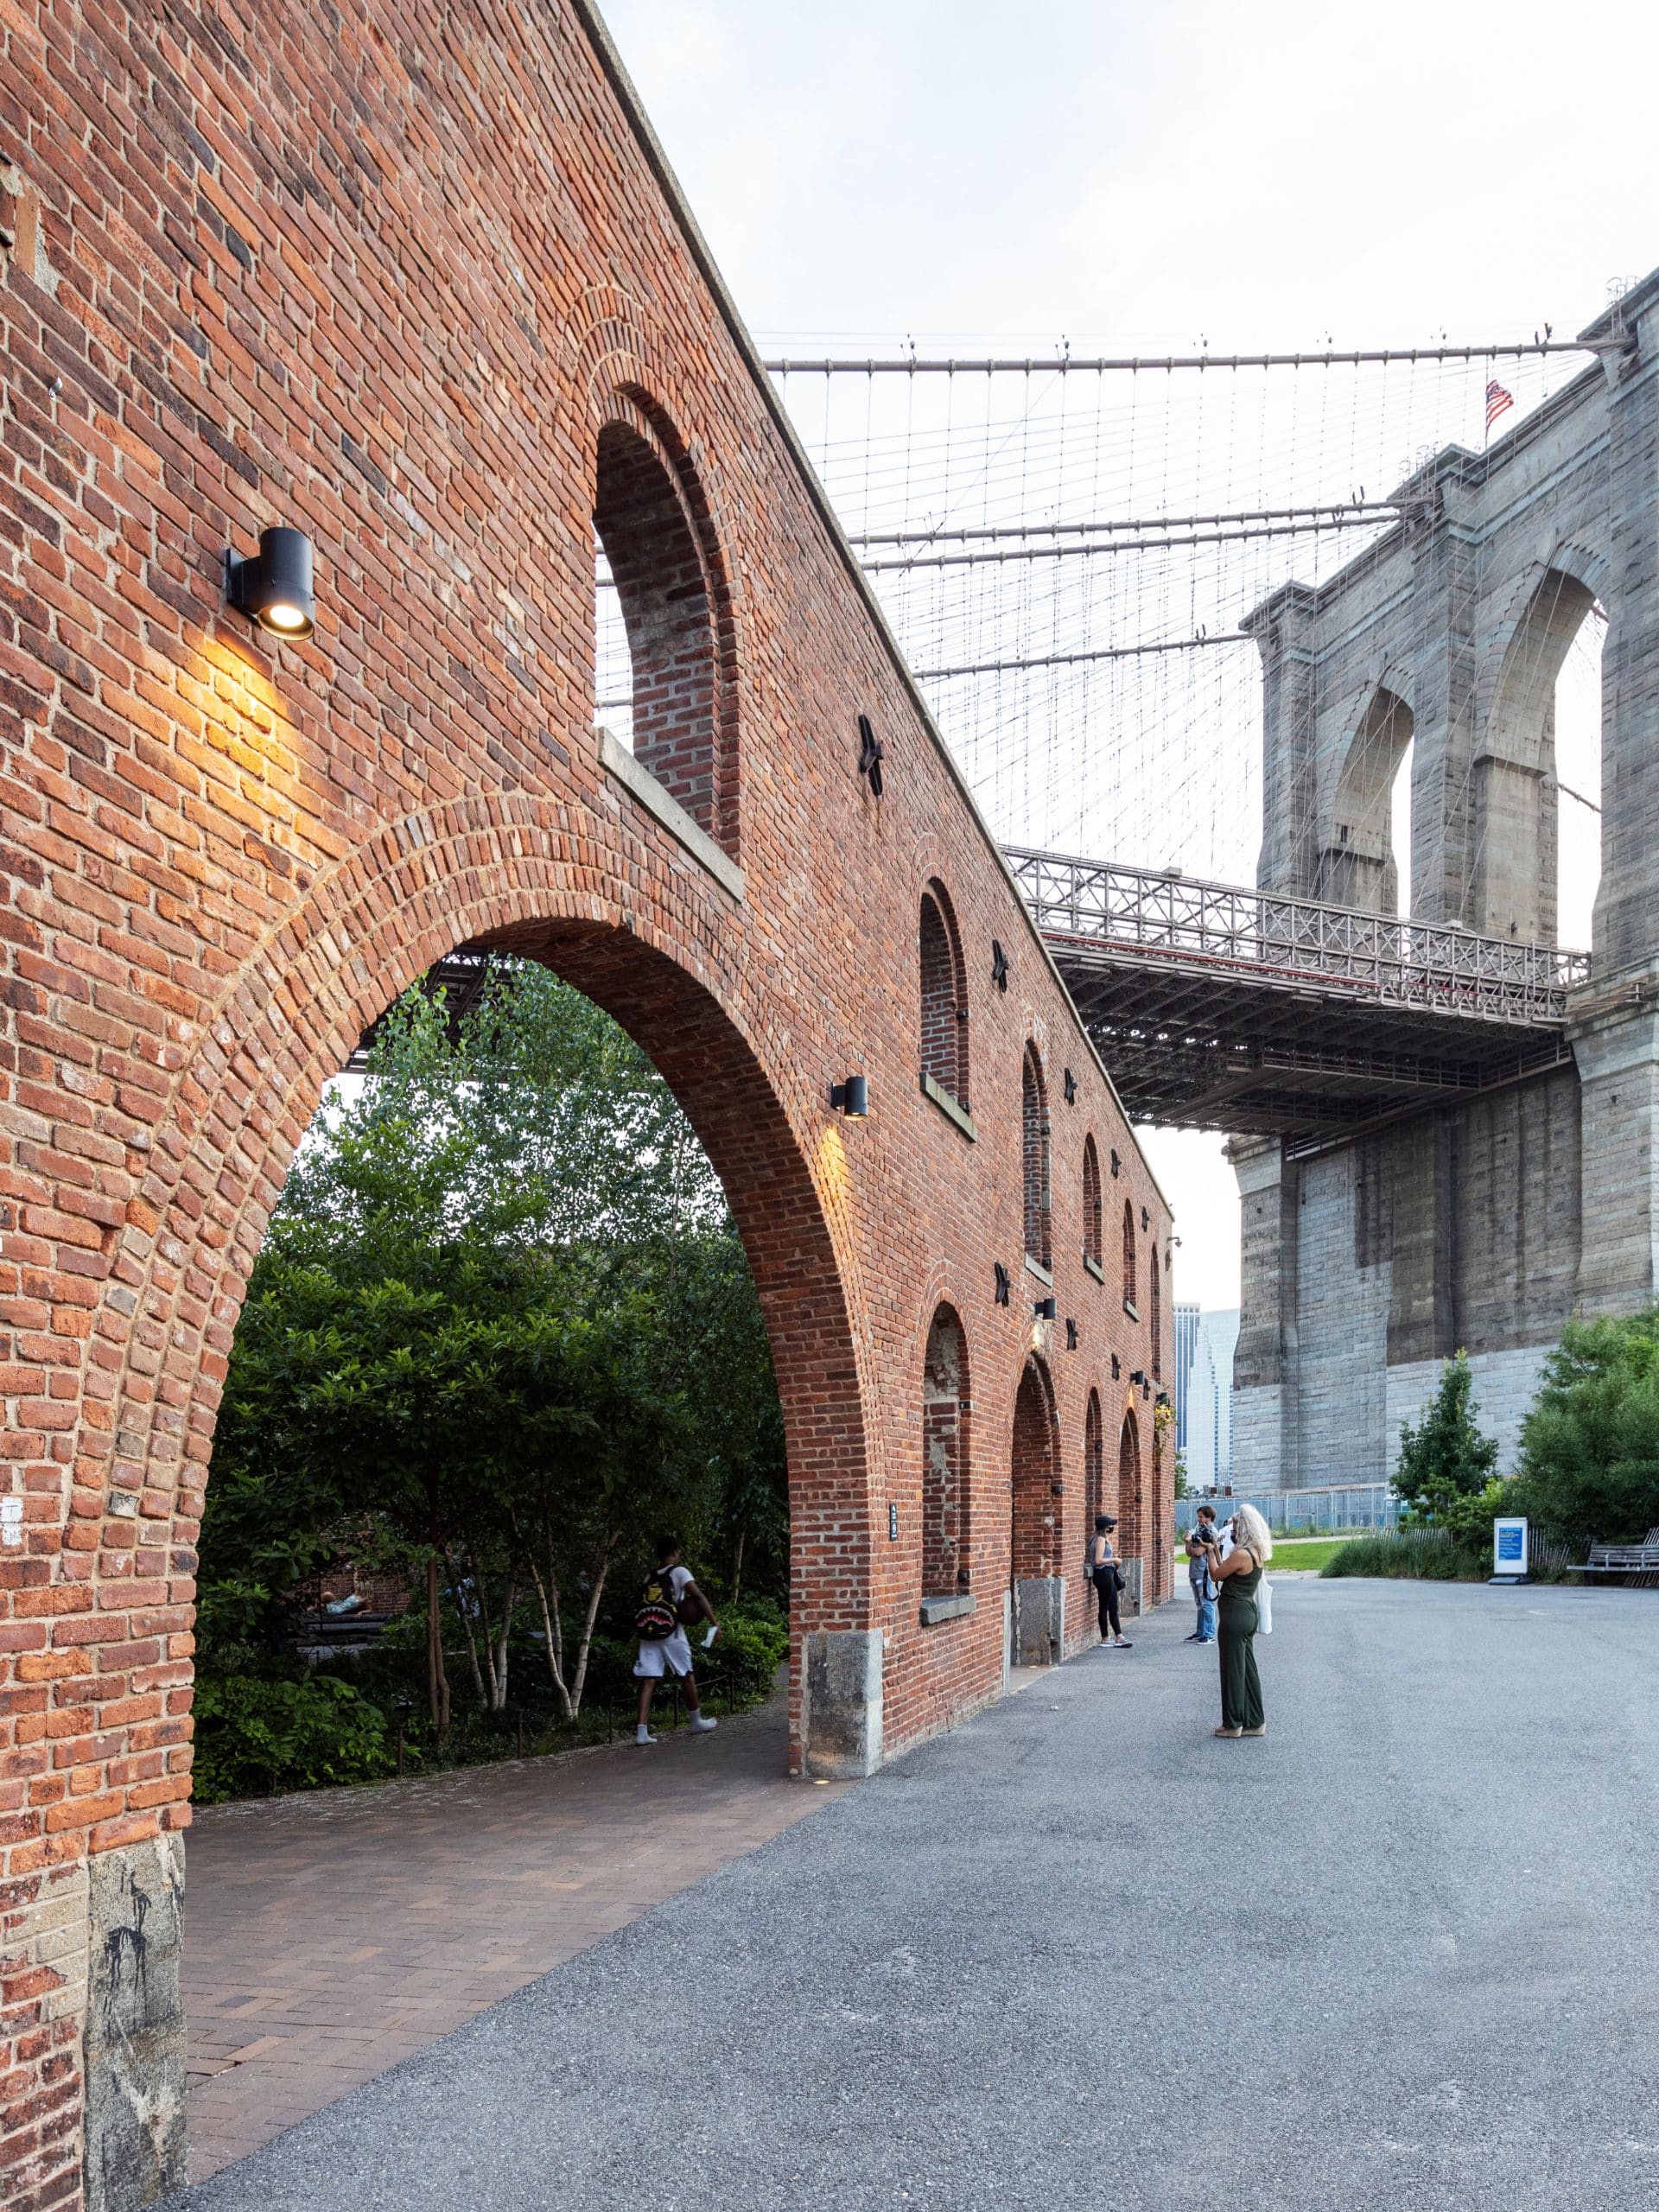 Arched brick entrance to Max Family Garden with Brooklyn Bridge overhead.